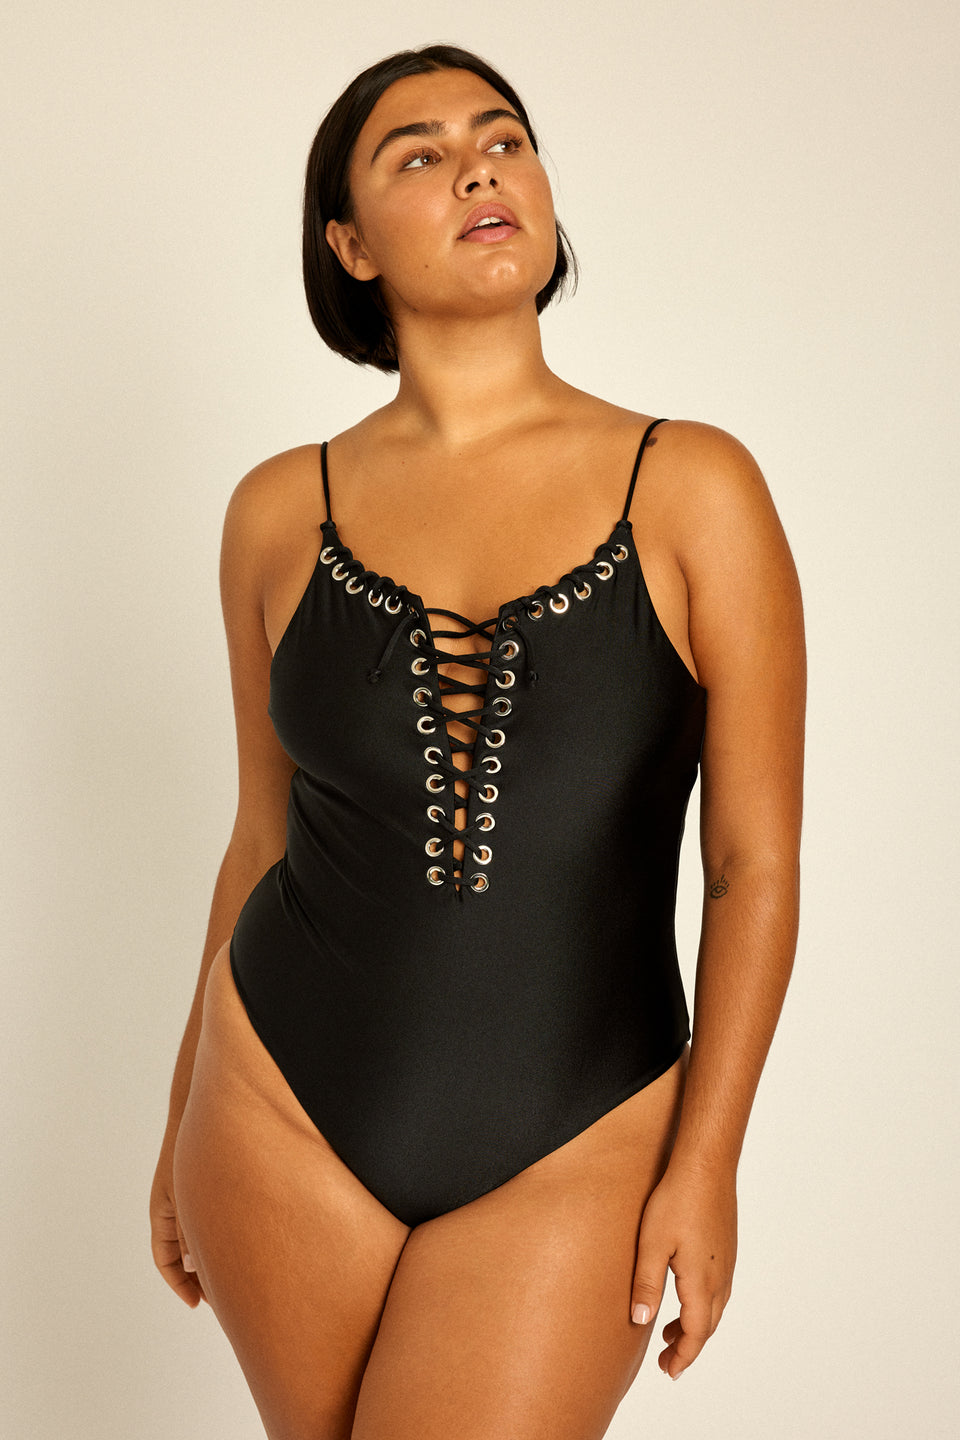 Beautiful curvy model in plus size XL Eyelet Swimsuit for summer beach & vacation.